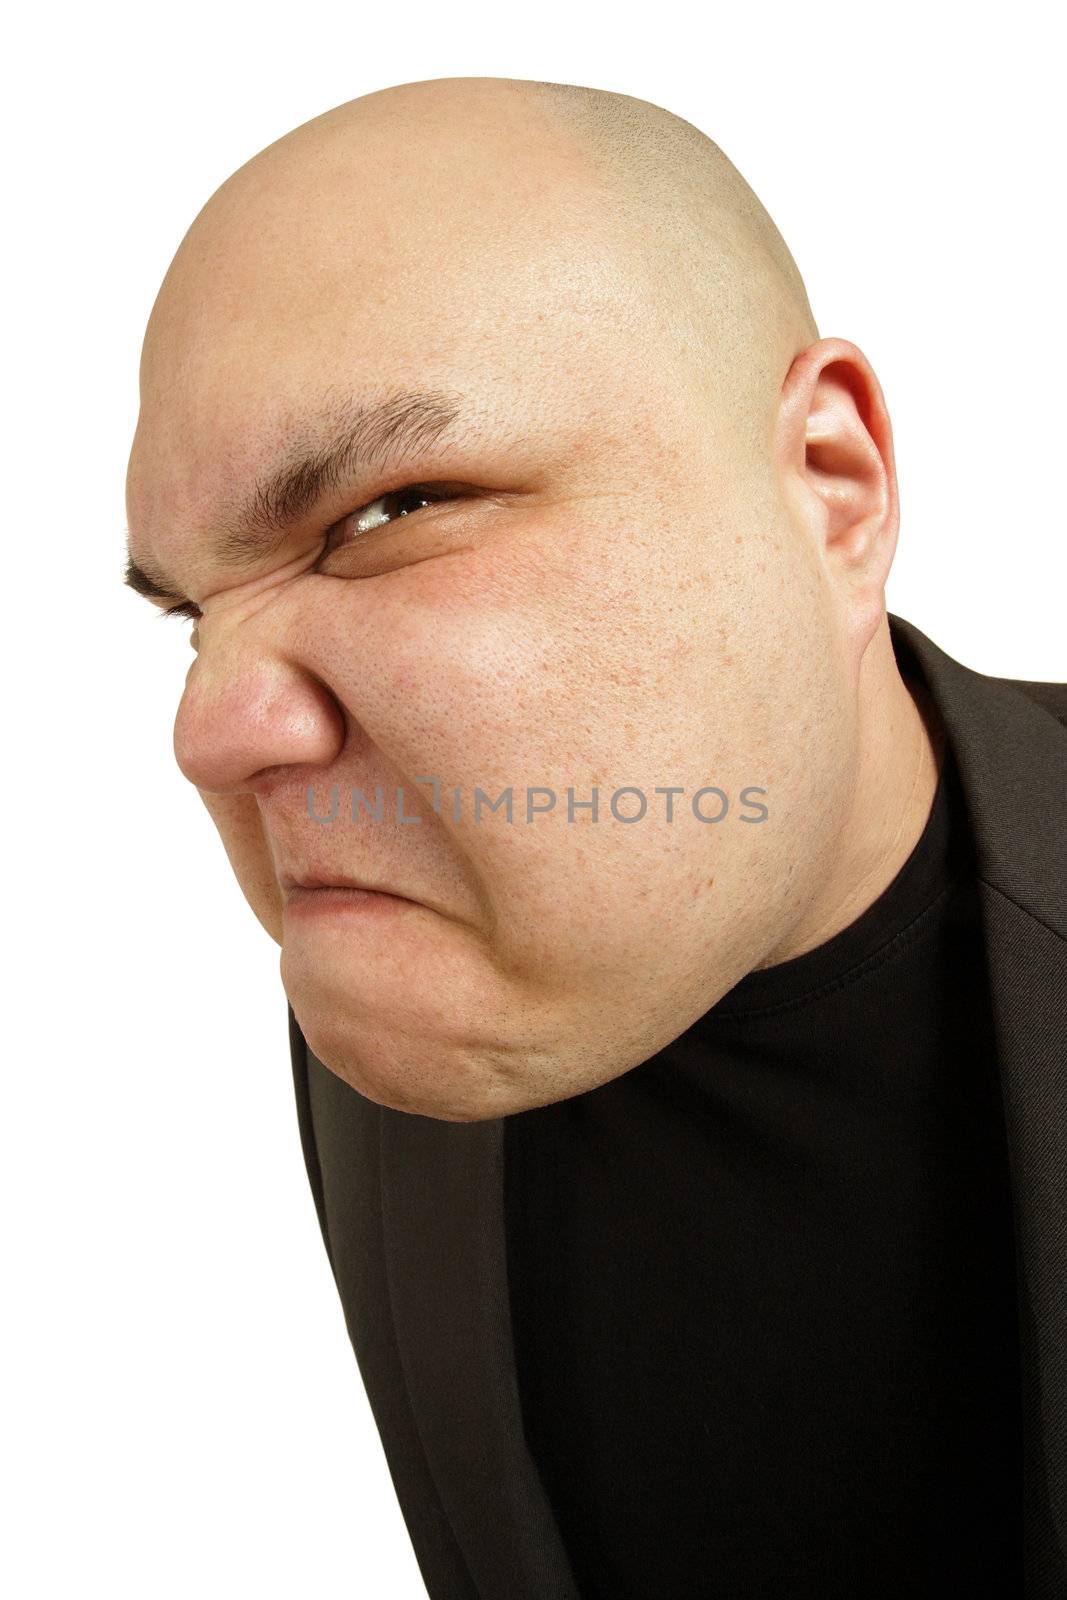 A bald man with an angry threatening sneer or disgusted look on his face.
